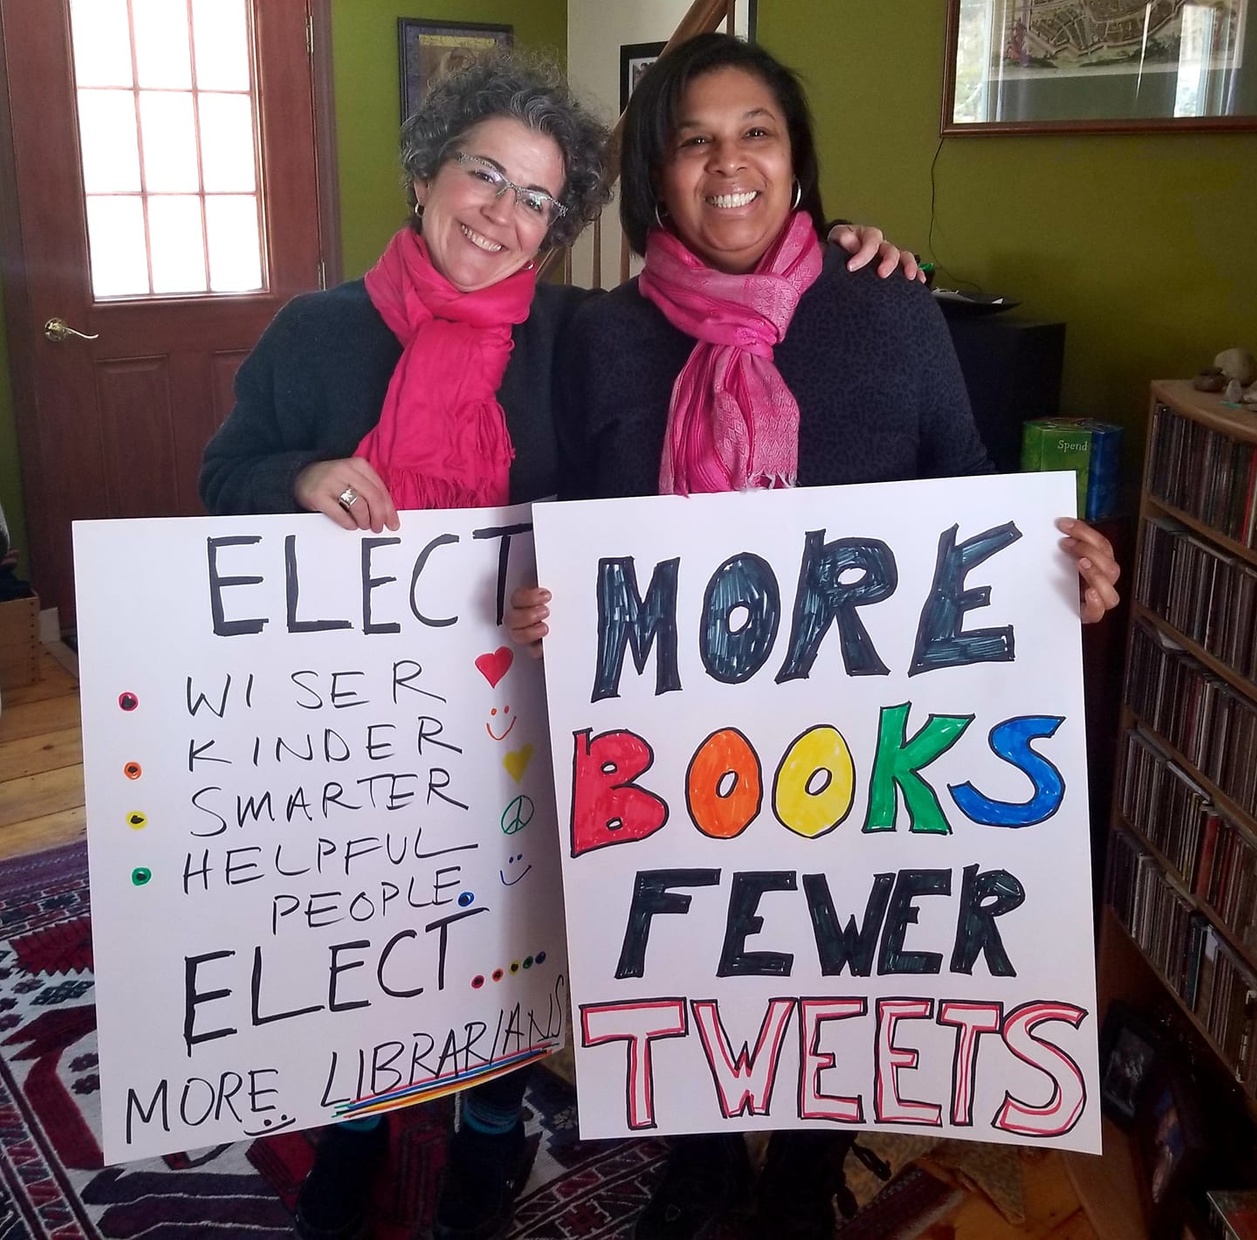 Two middle-aged women standing together in an interior and wearing pink scarves are smiling and holding posters that say “ELECT… MORE LIBRARIANS” and “MORE BOOKS FEWER TWEETS.”